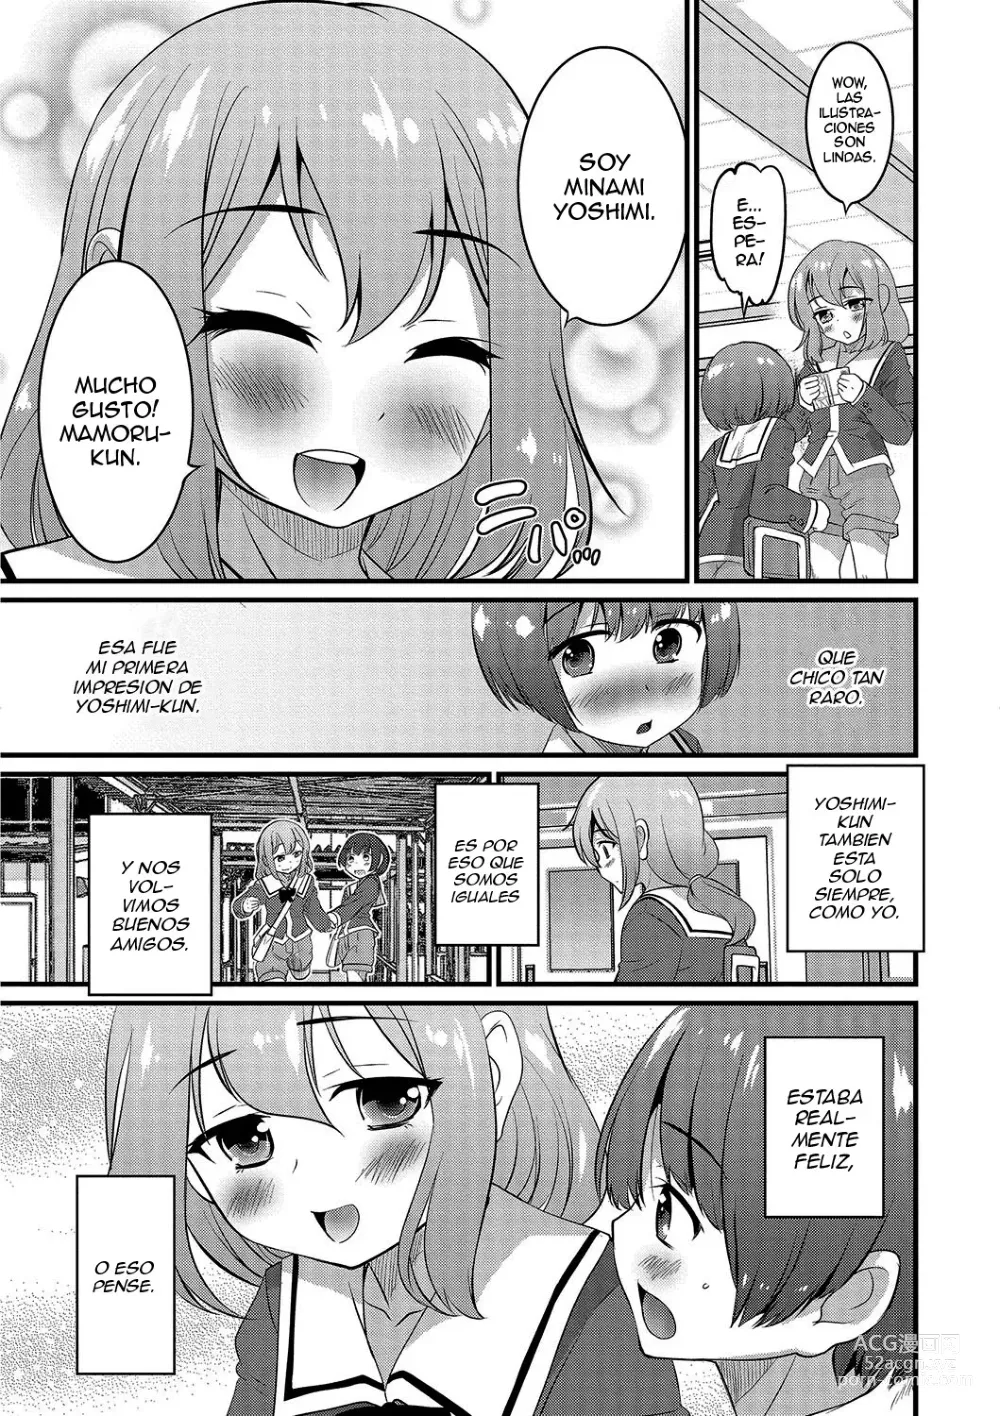 Page 3 of manga The Things I Don't Know.